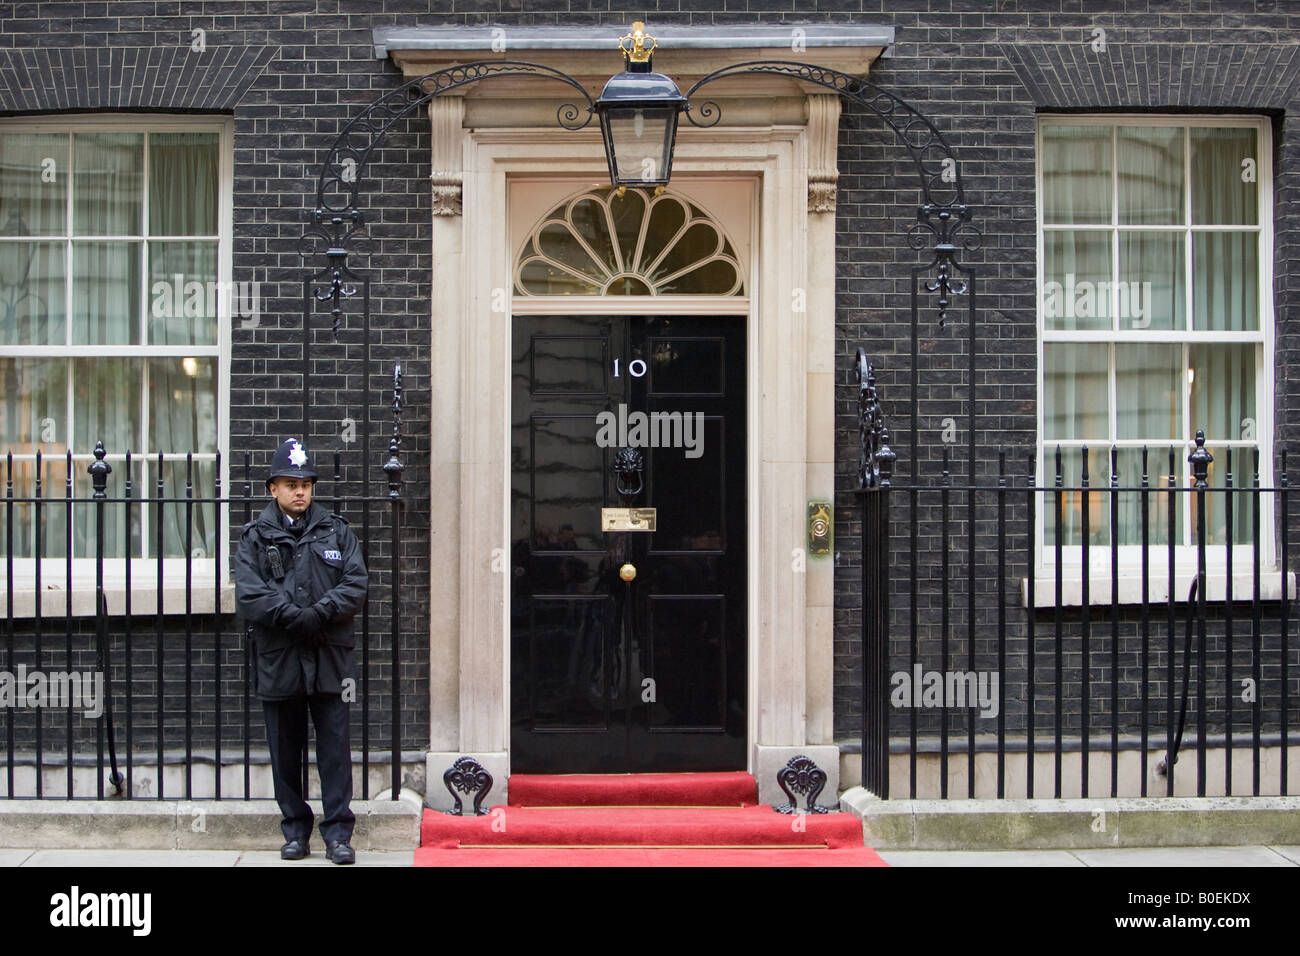 Armed policeman guards Number 10 Downing Street official home of the British Prime Minister London UK Stock Photo